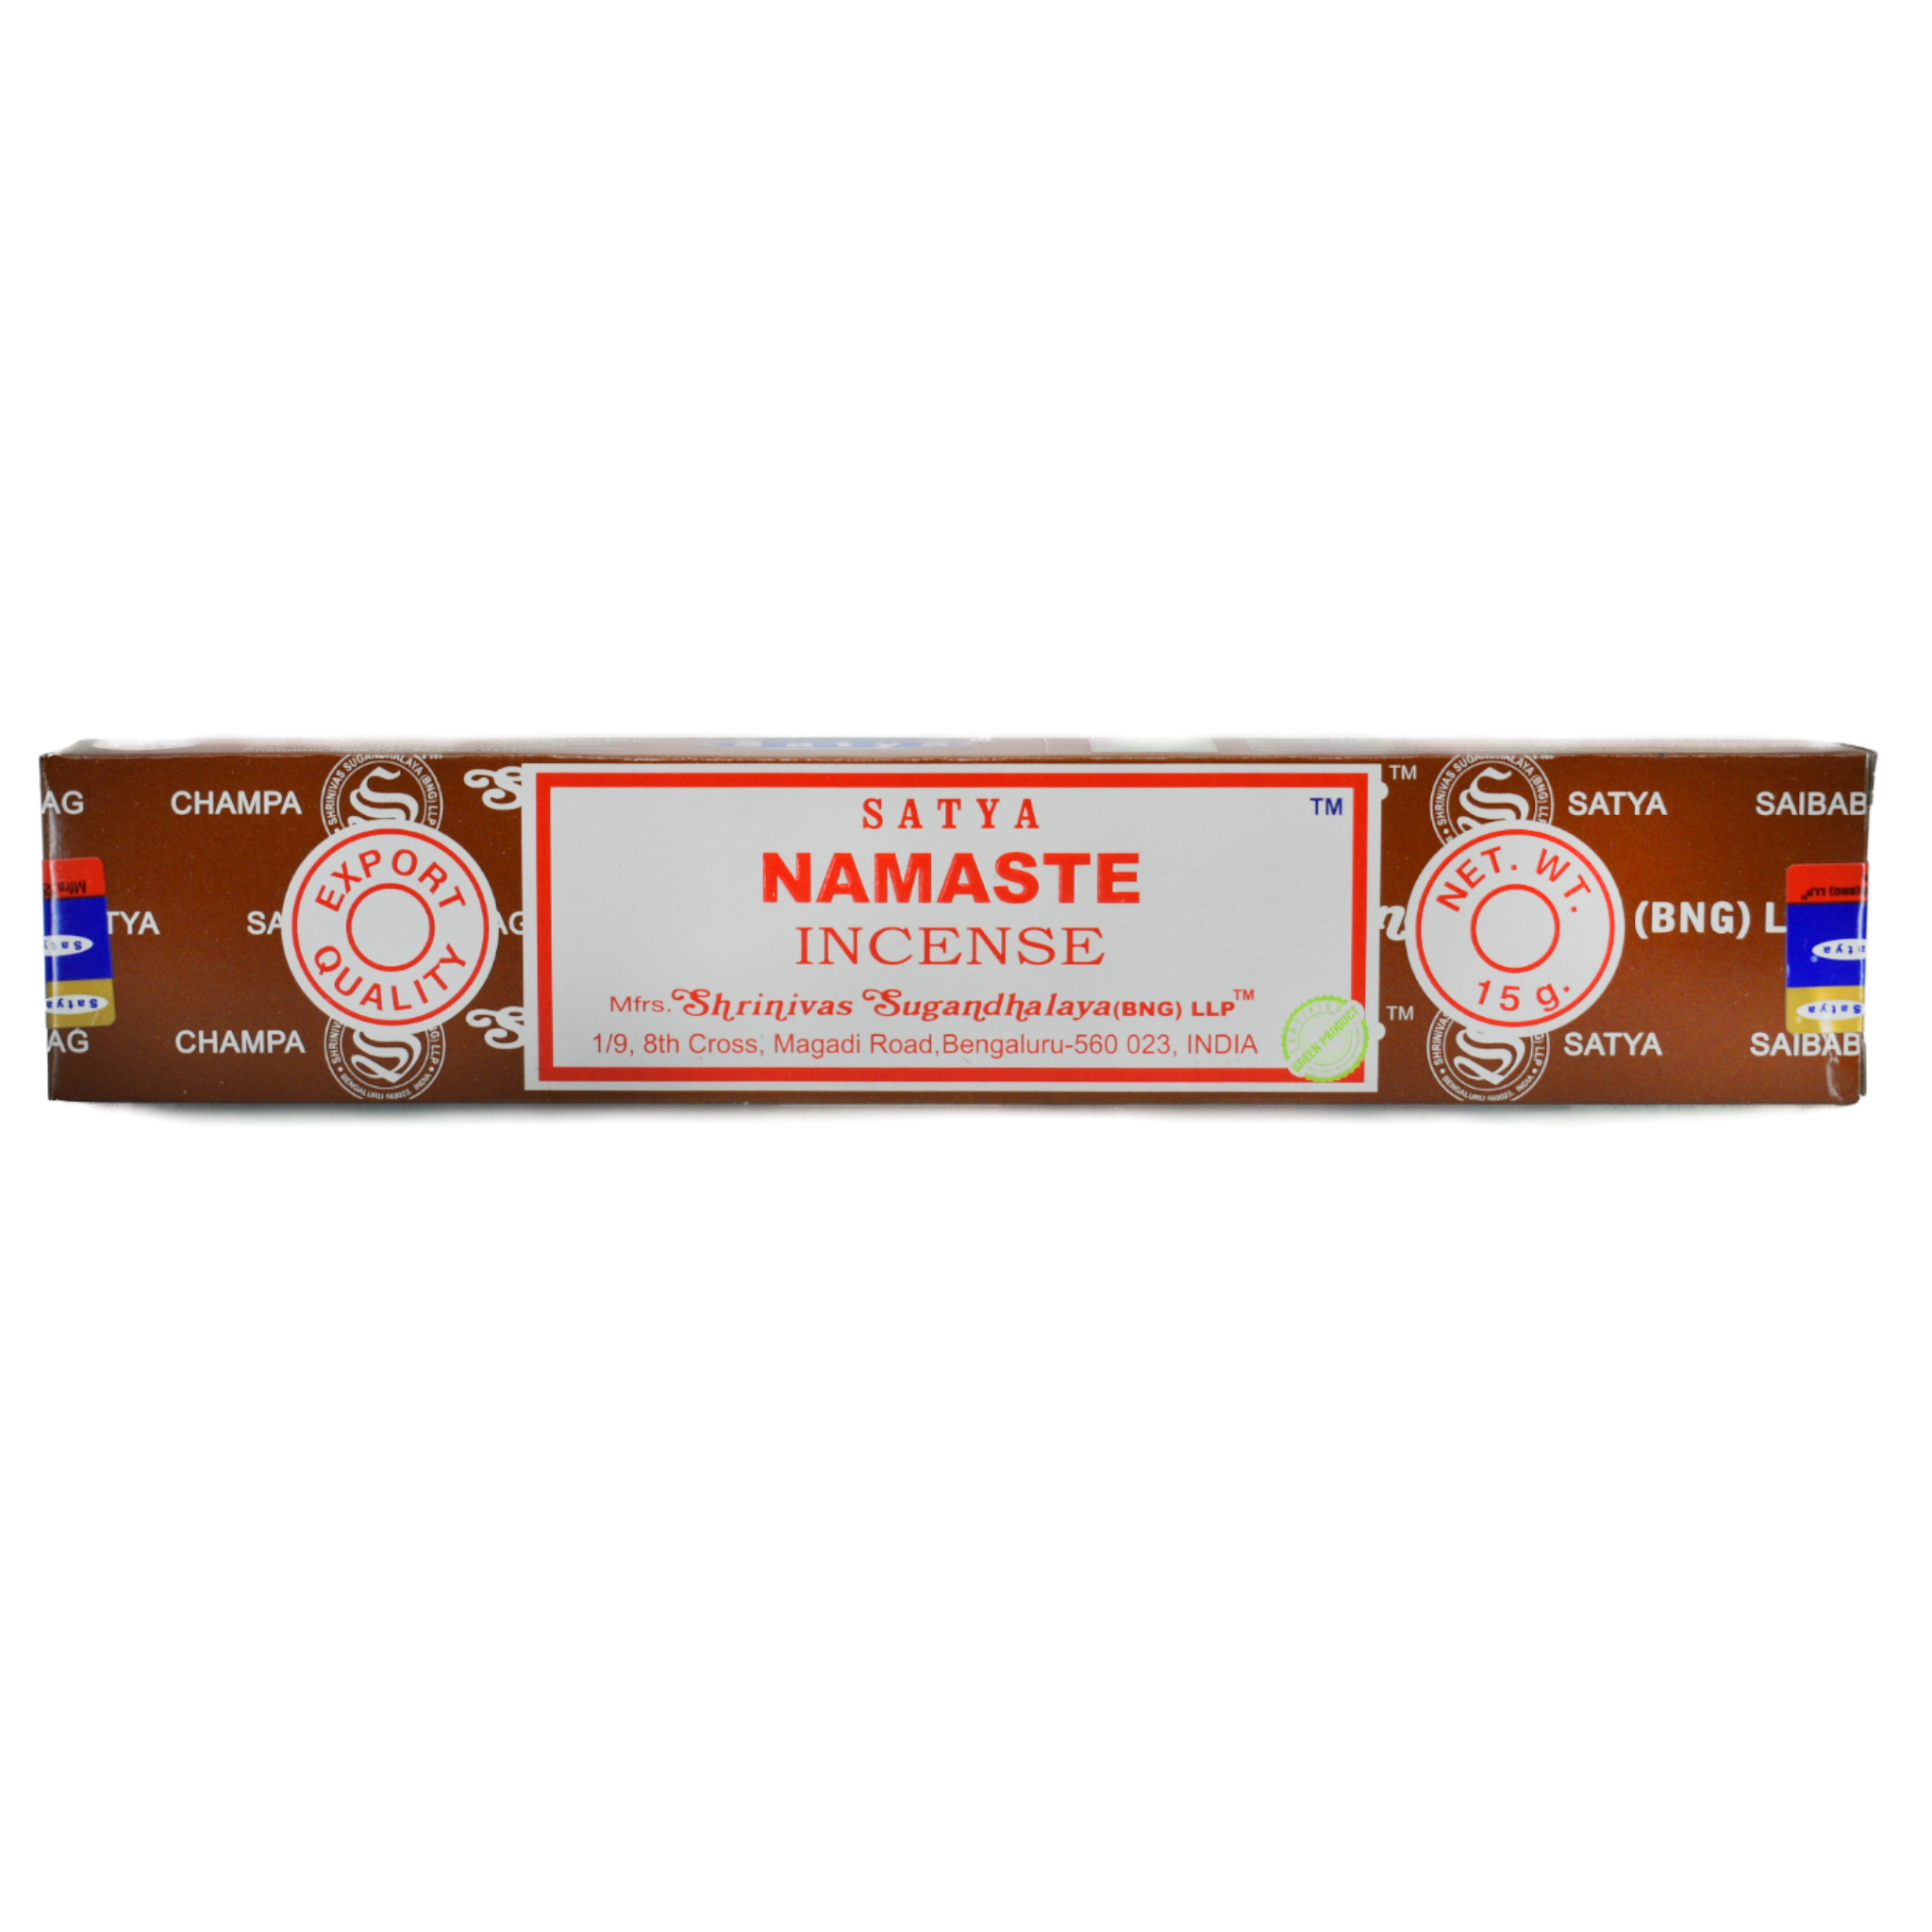 Namaste Incense Sticks.  Box is brown with white lines that have company words as a design. The center of the box has a white rectangle with a red frame within the border. In the rectangle the top line has the company name. The next rows have the title Namaste Incense. At the bottom of the rectangle is the manufacturer&